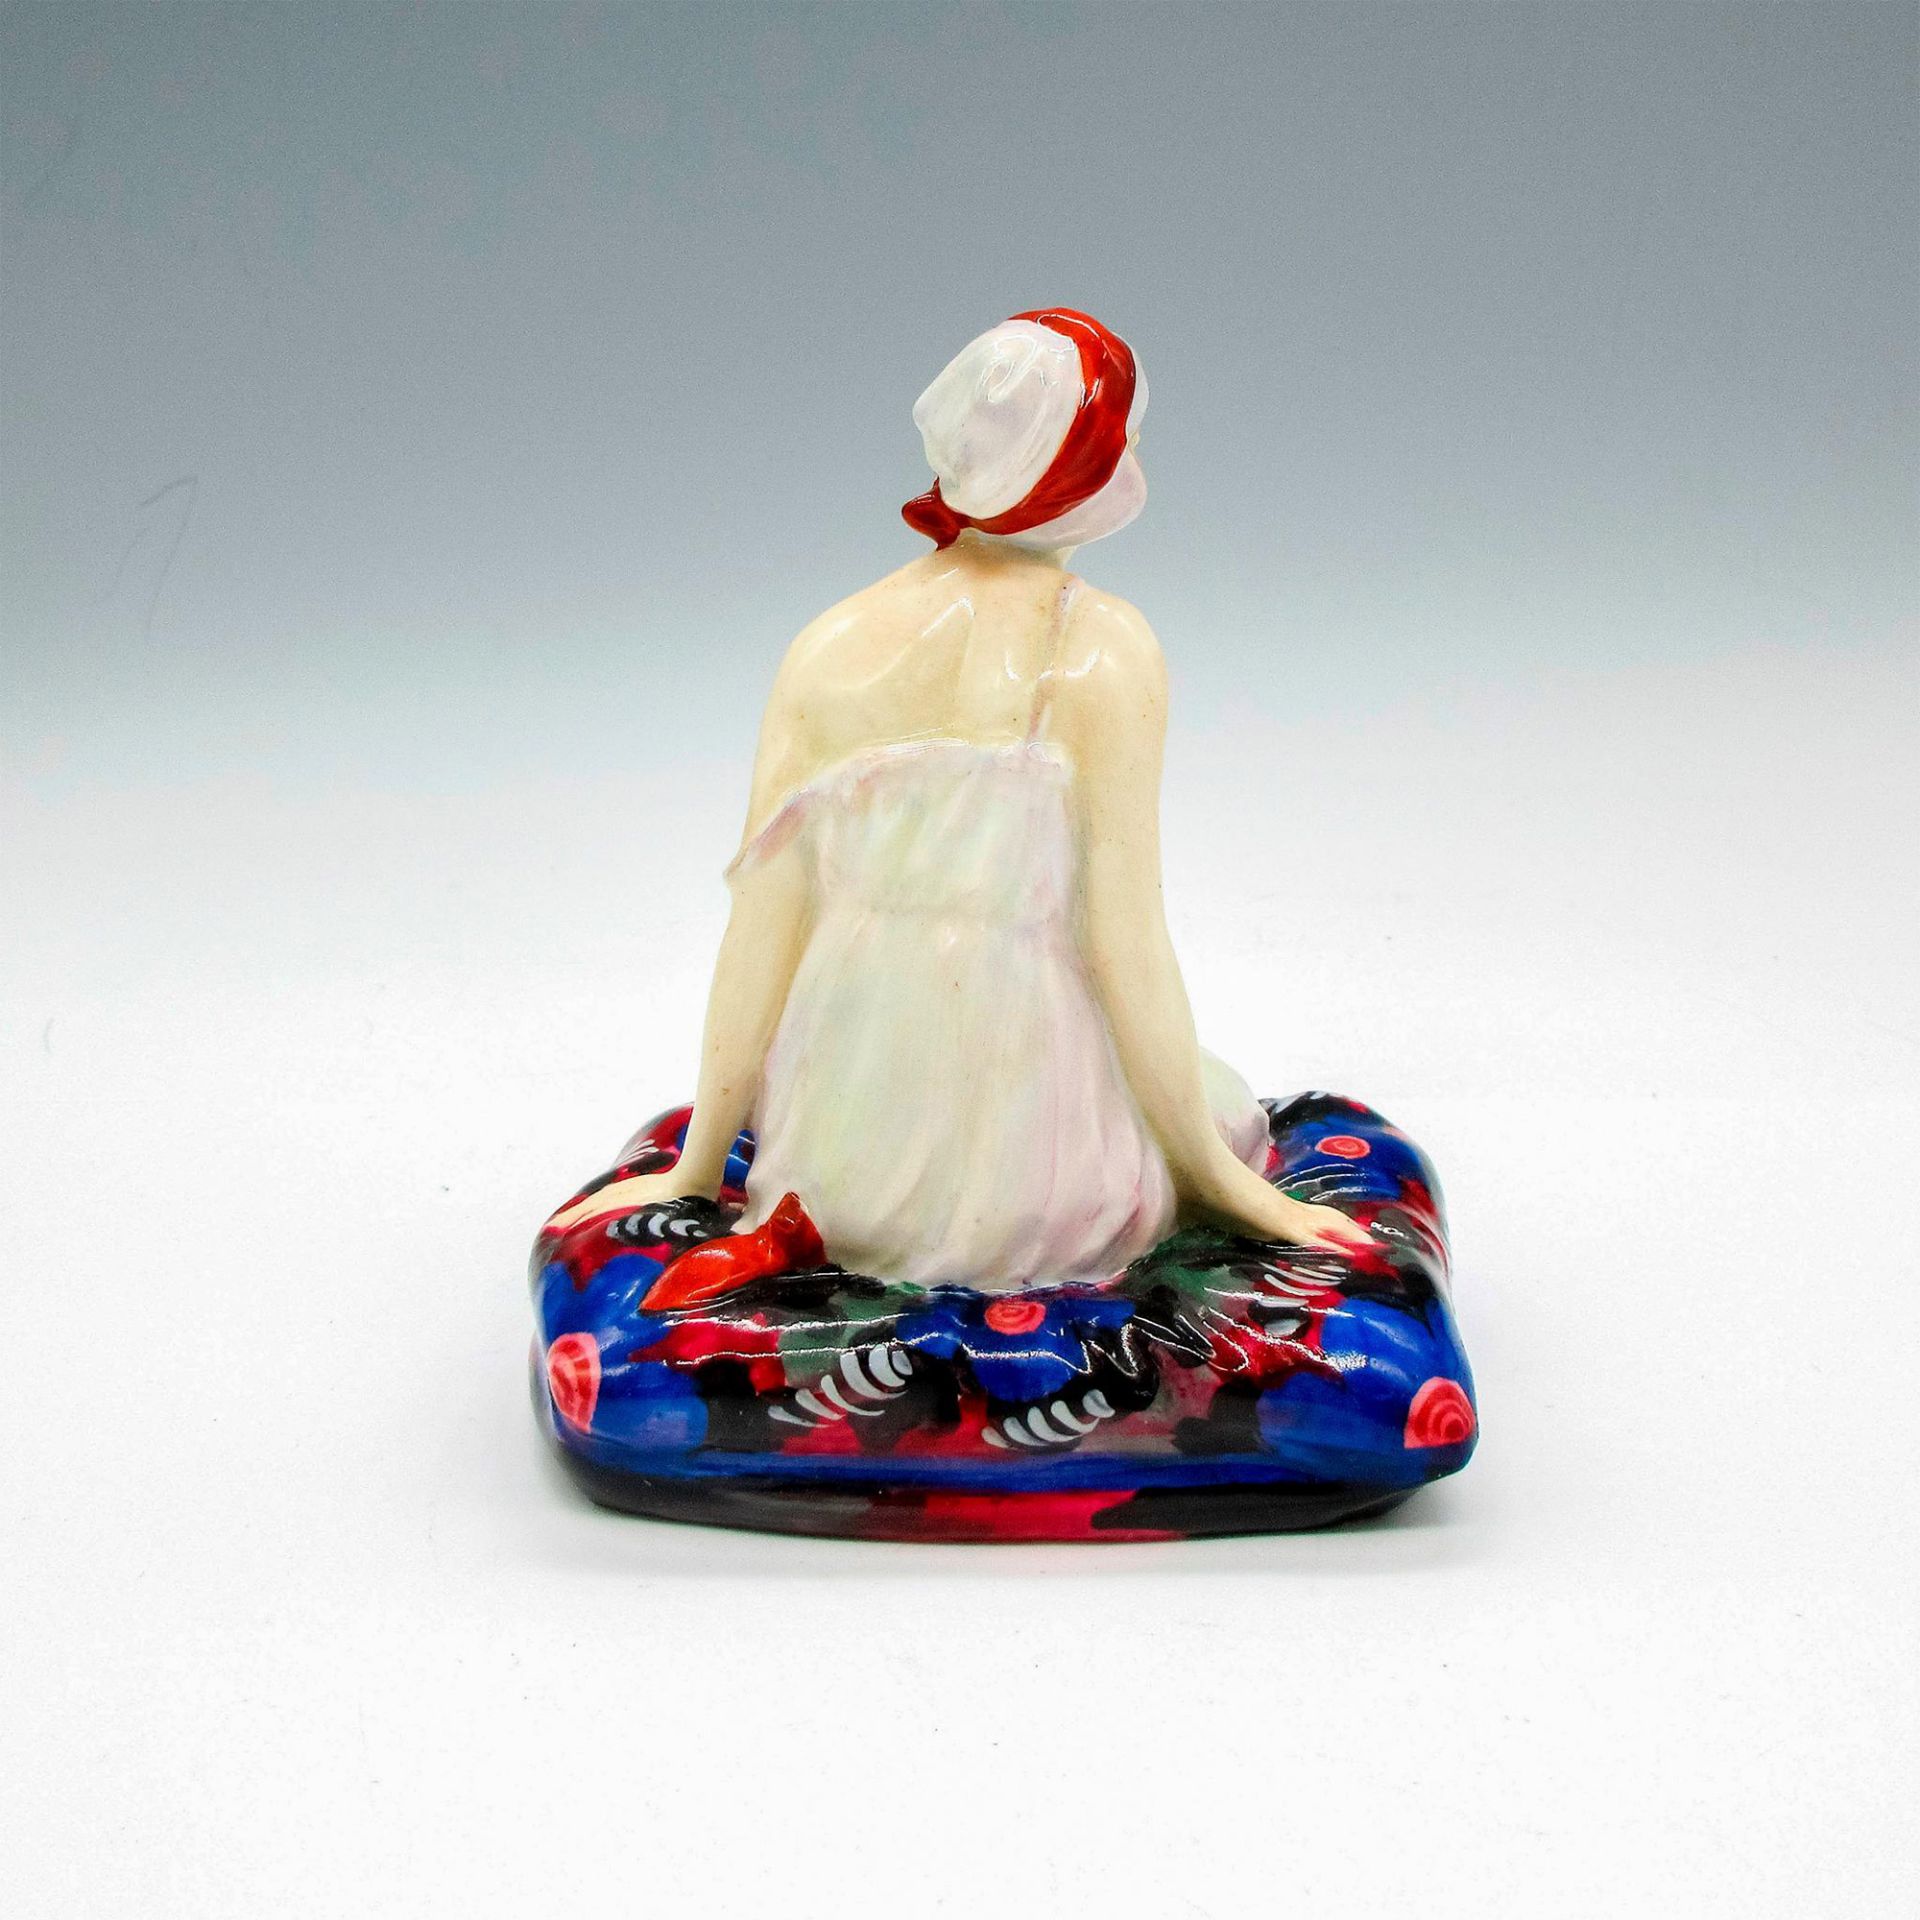 Negligee HN1219 - Royal Doulton Figurine - Image 2 of 3